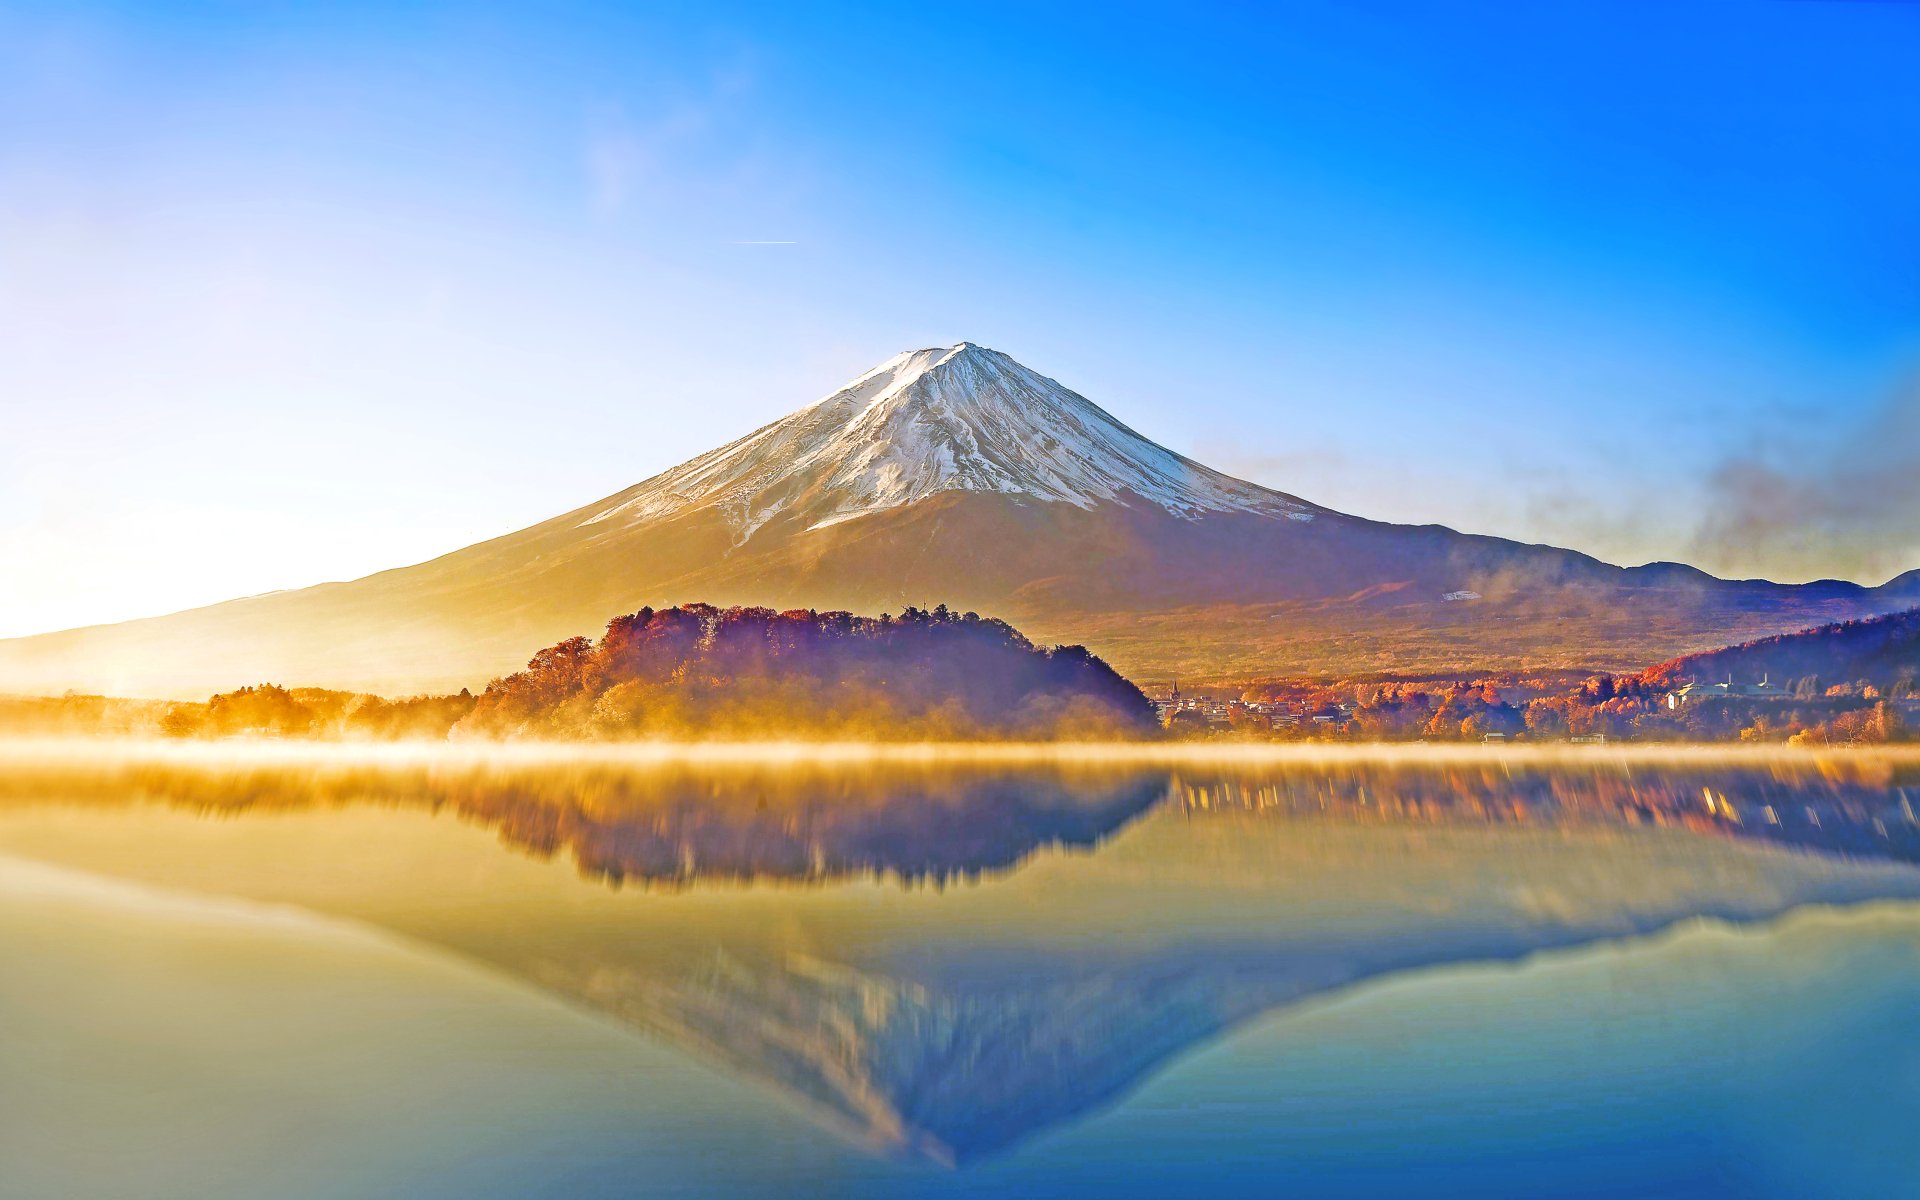 20 4k Ultra Hd Mount Fuji Wallpapers Background Images